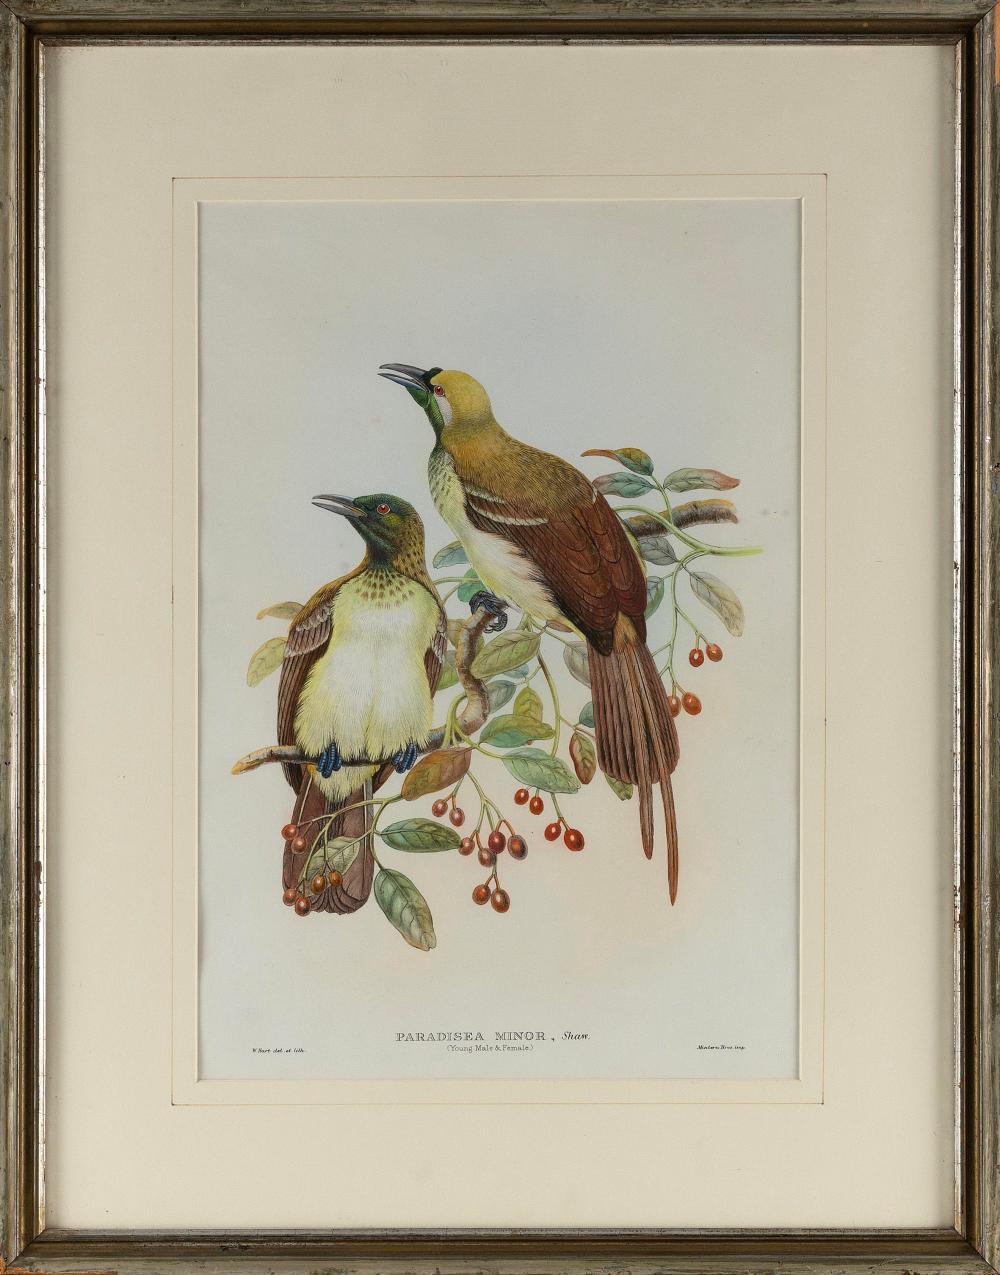 HAND-COLORED LITHOGRAPH OF BIRDS